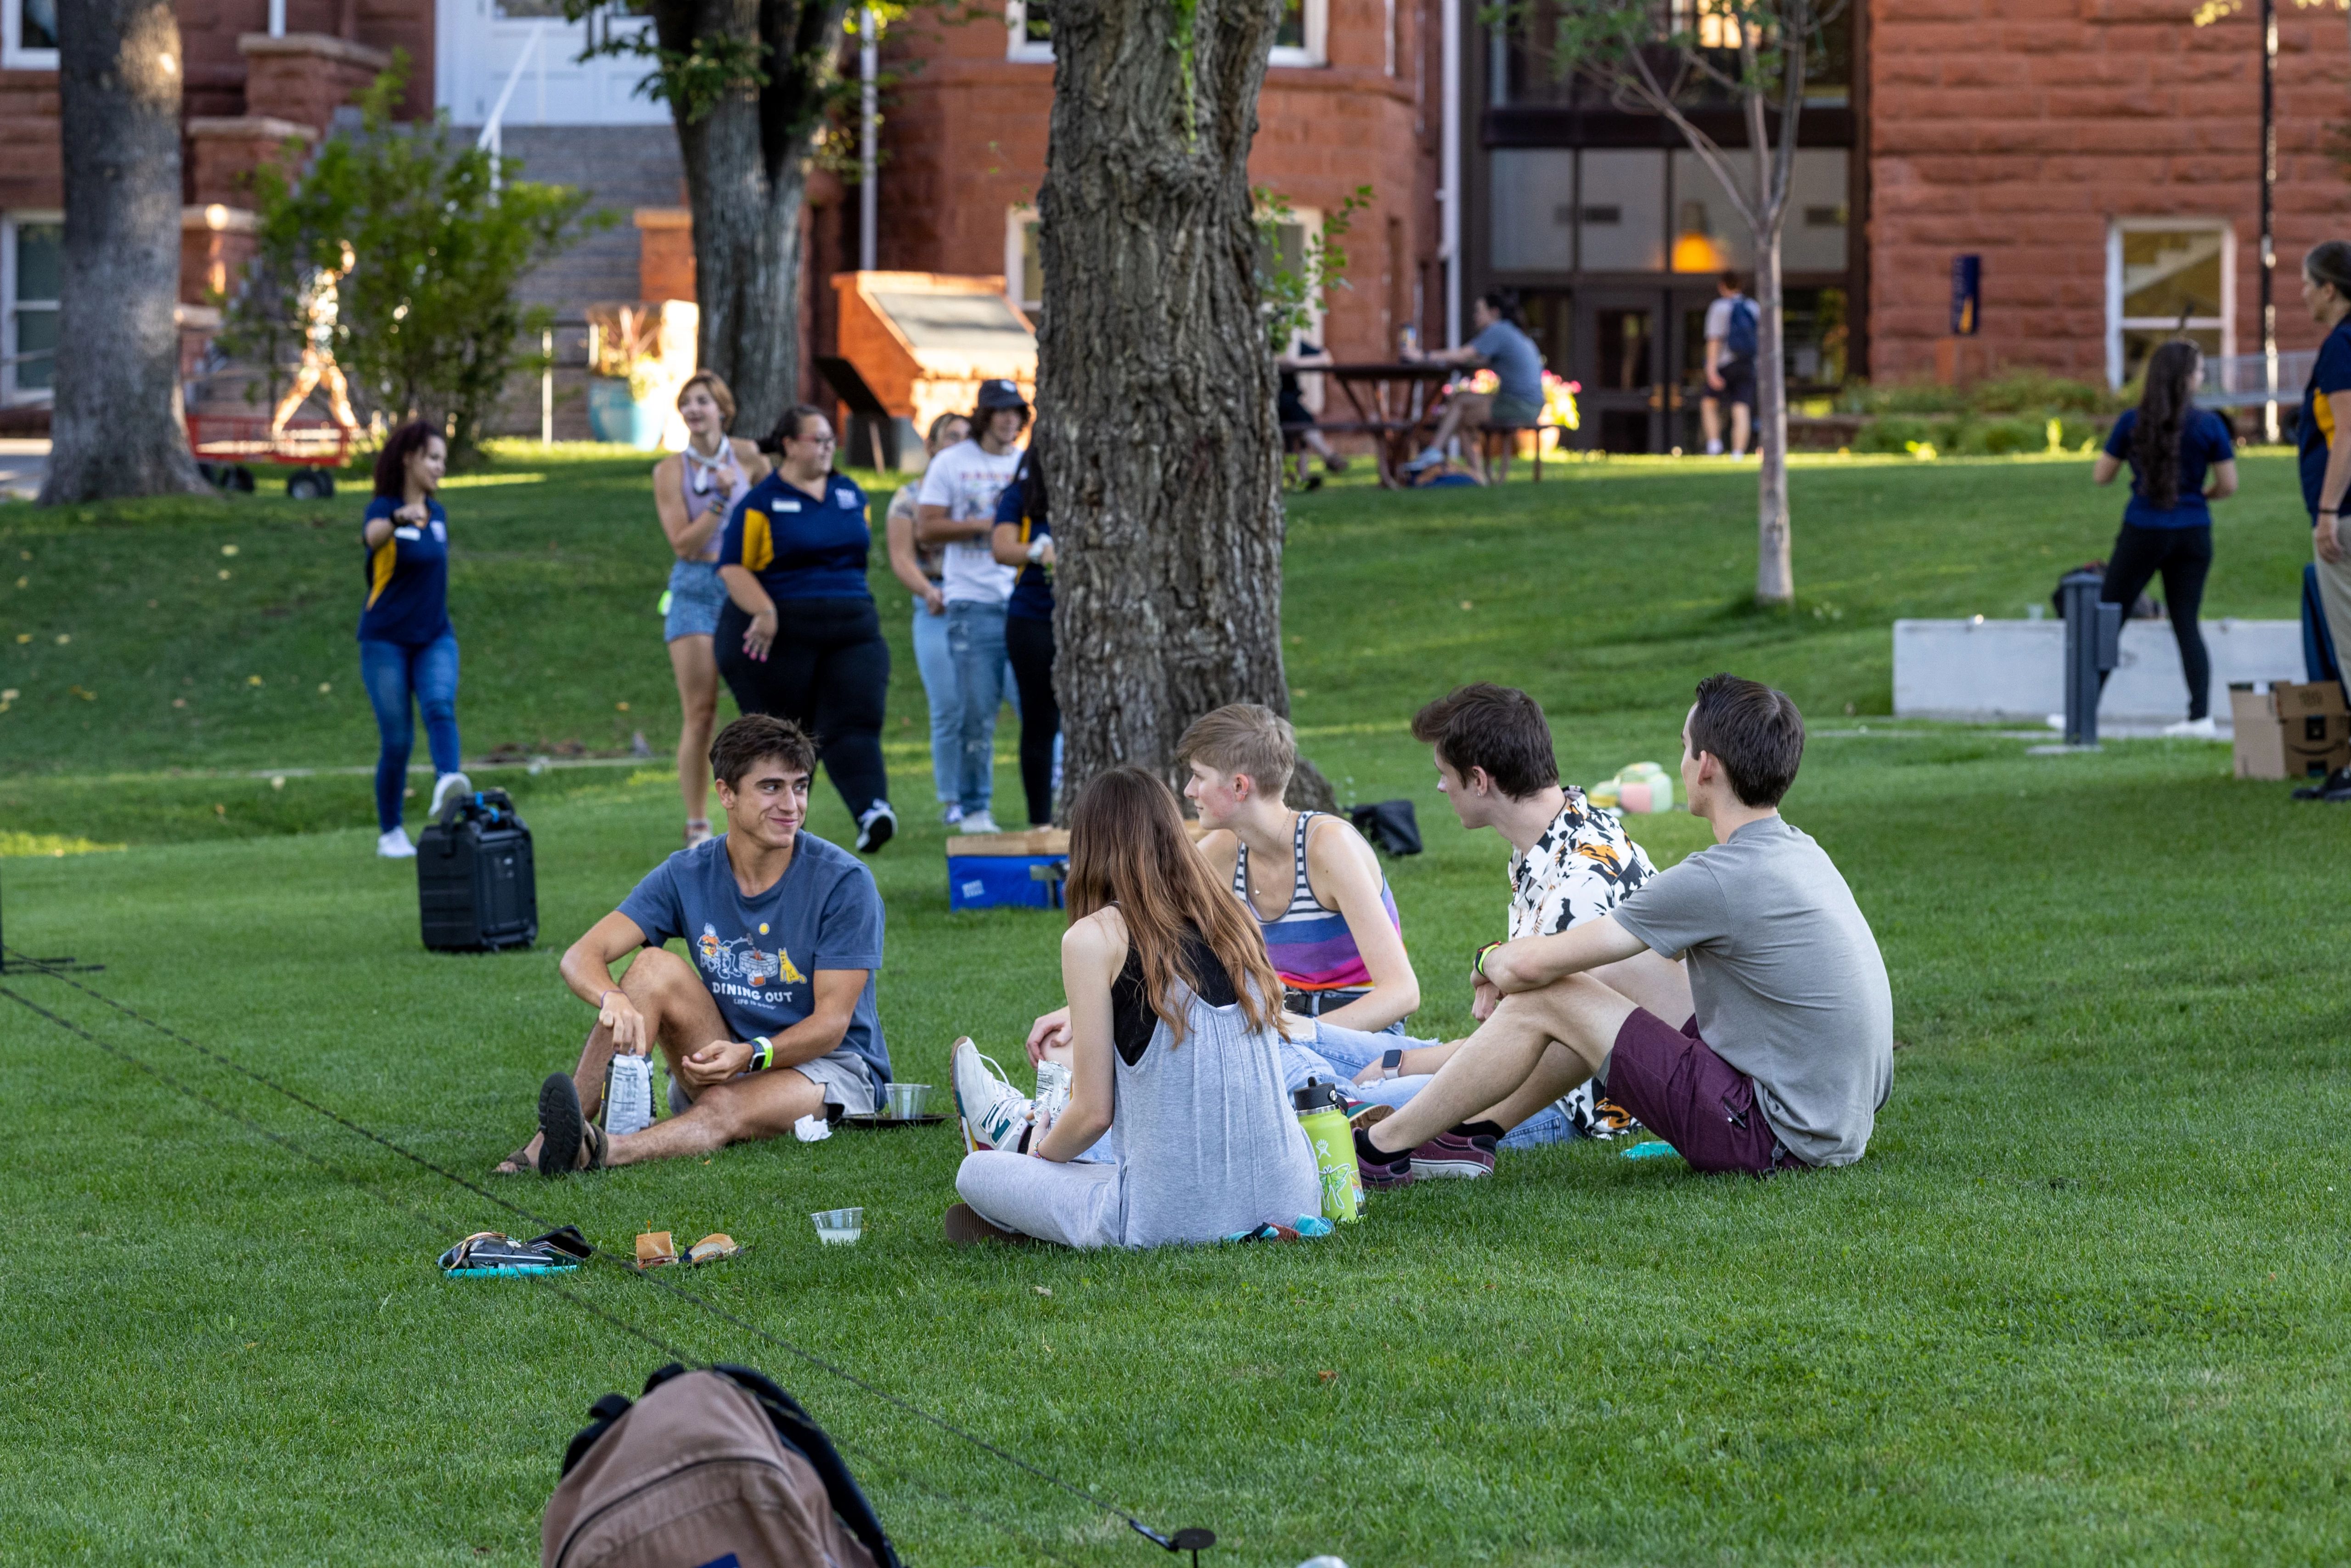 Group of students eating together on grass field at N A U welcome picnic.